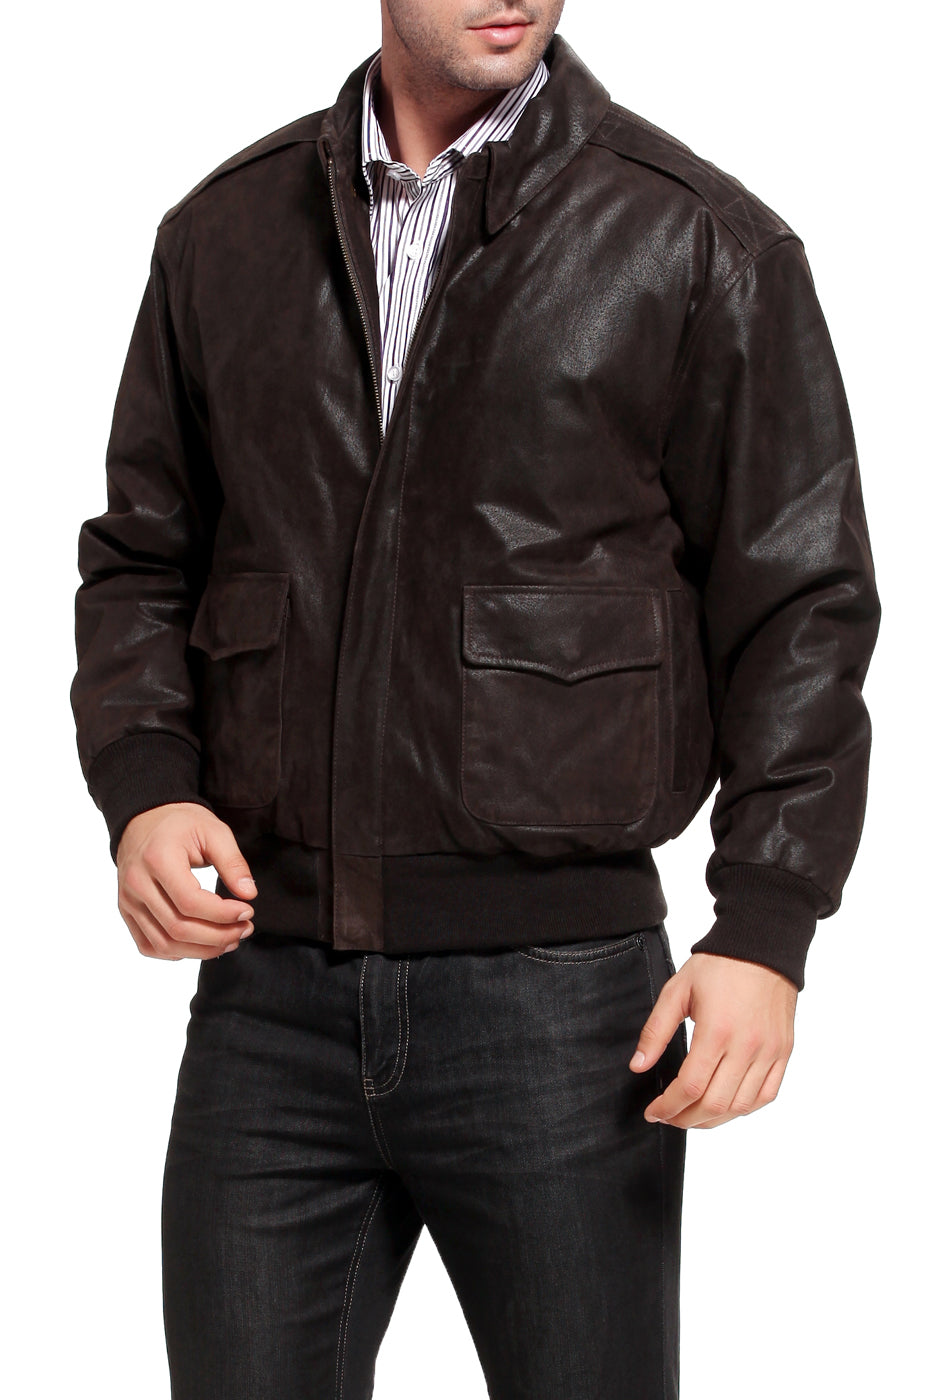 FEDTOSING Men's Faux Leather Bomber Jacket with Maldives